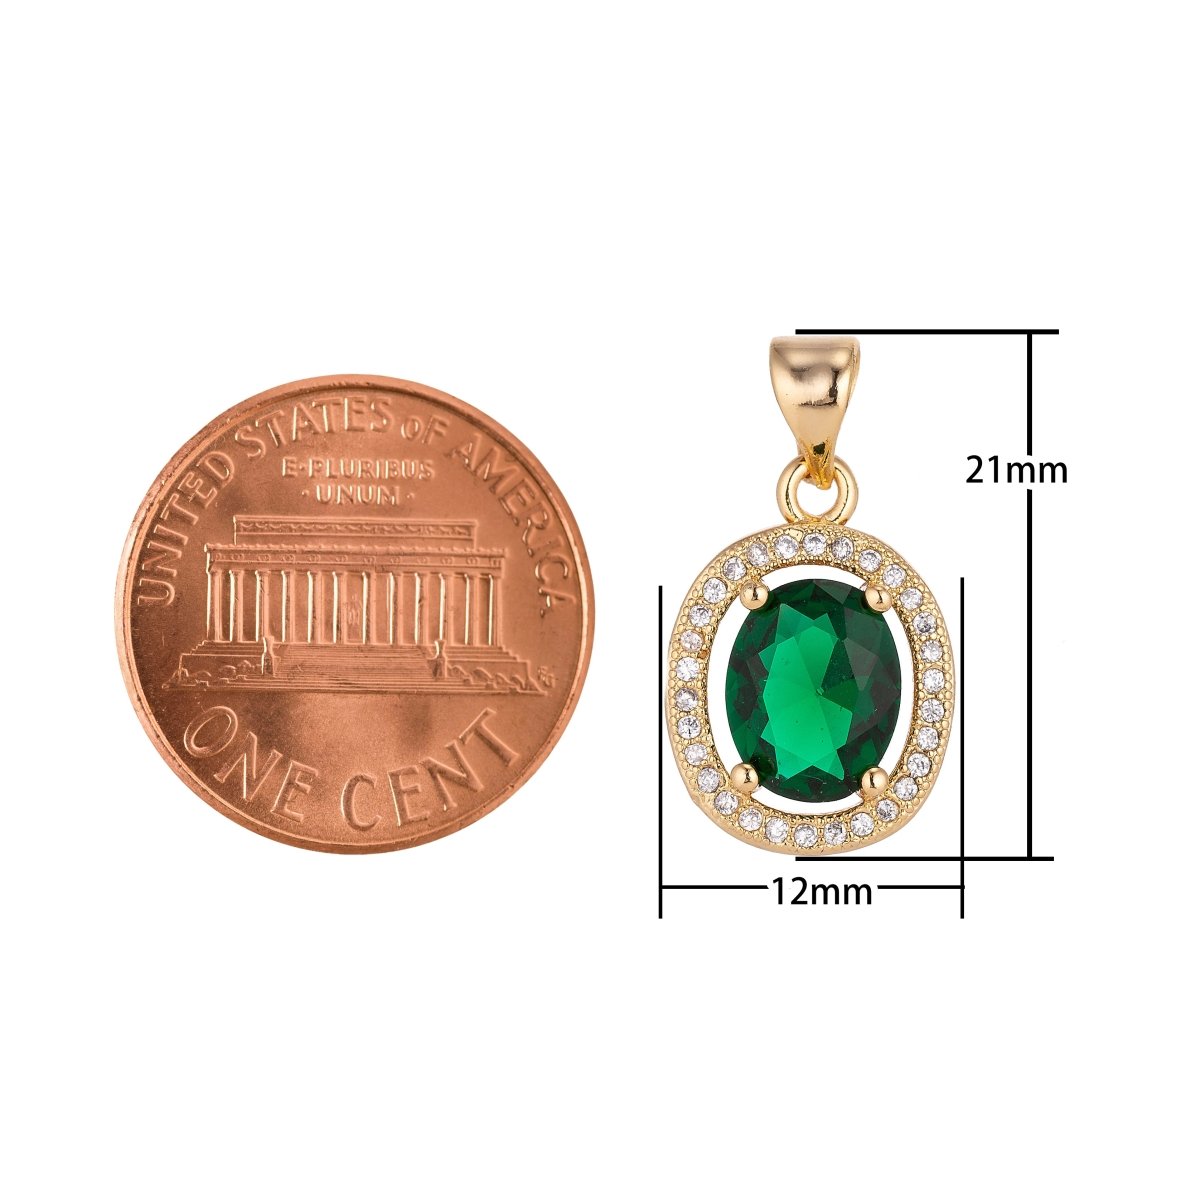 Dainty Emerald Charm Pendant 18k Gold Filled Classic Oval Cut Emerald with Cubic Zircon Gemstone Necklace for Jewelry Making May Birthstone H-214 - DLUXCA